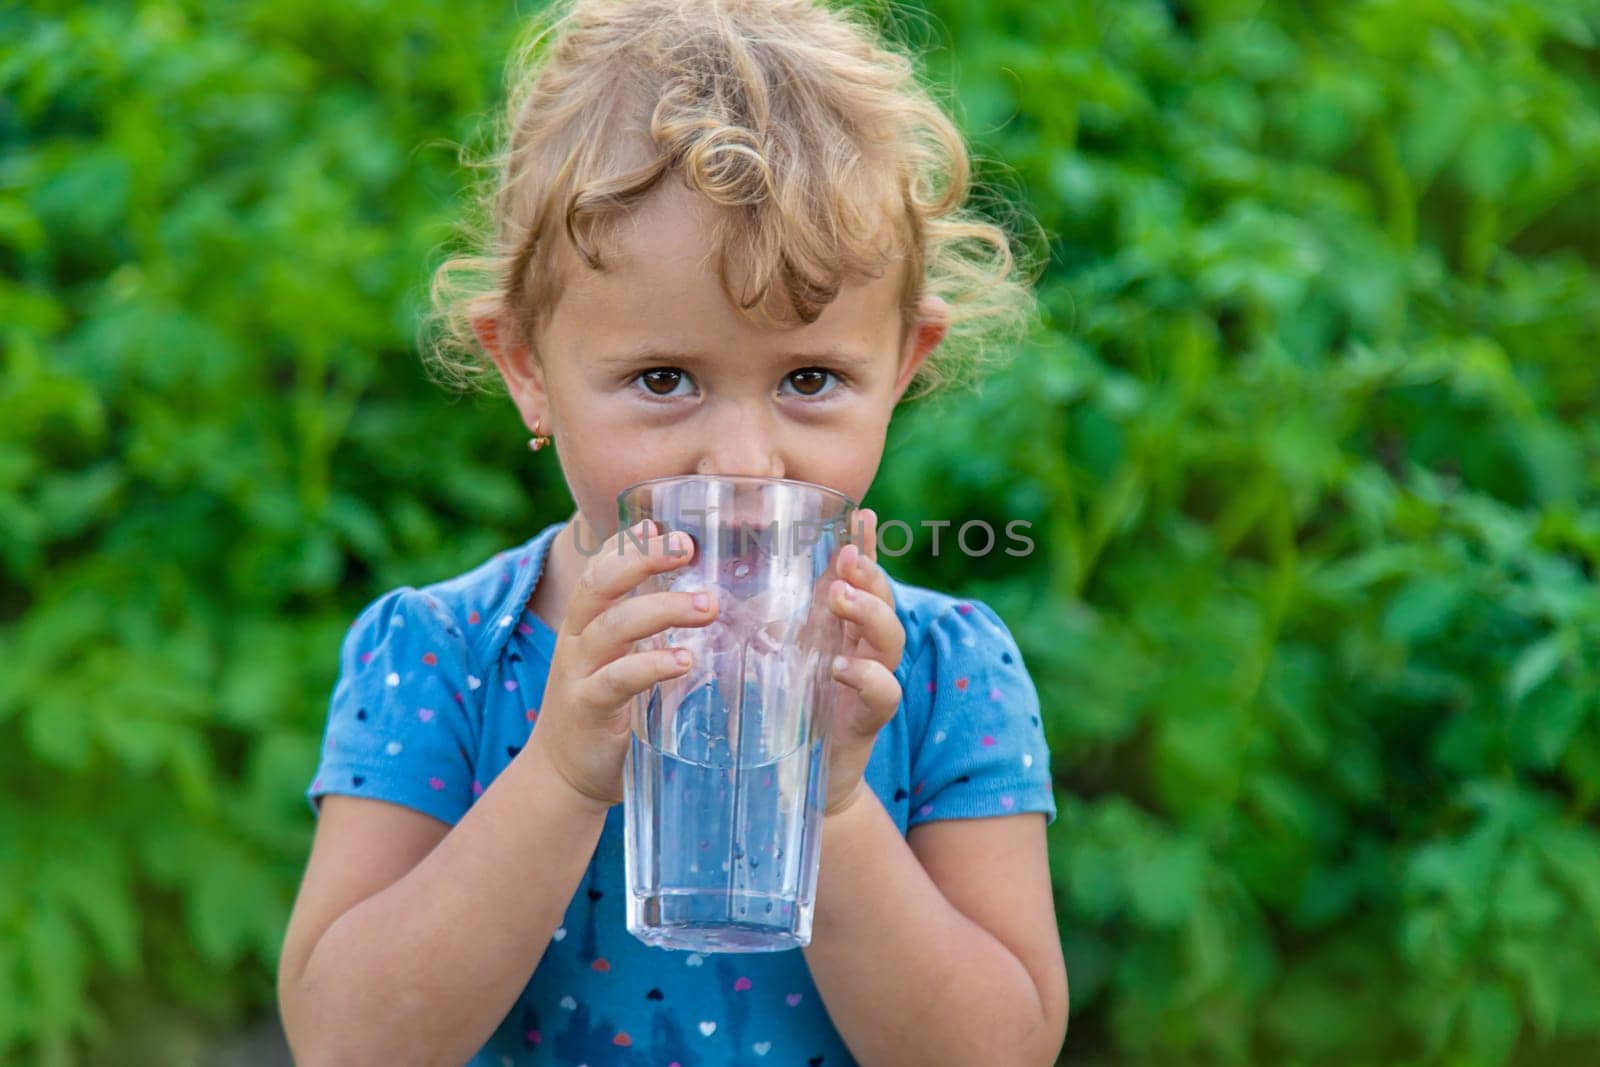 A child drinks water from a glass. Selective focus. Kid.